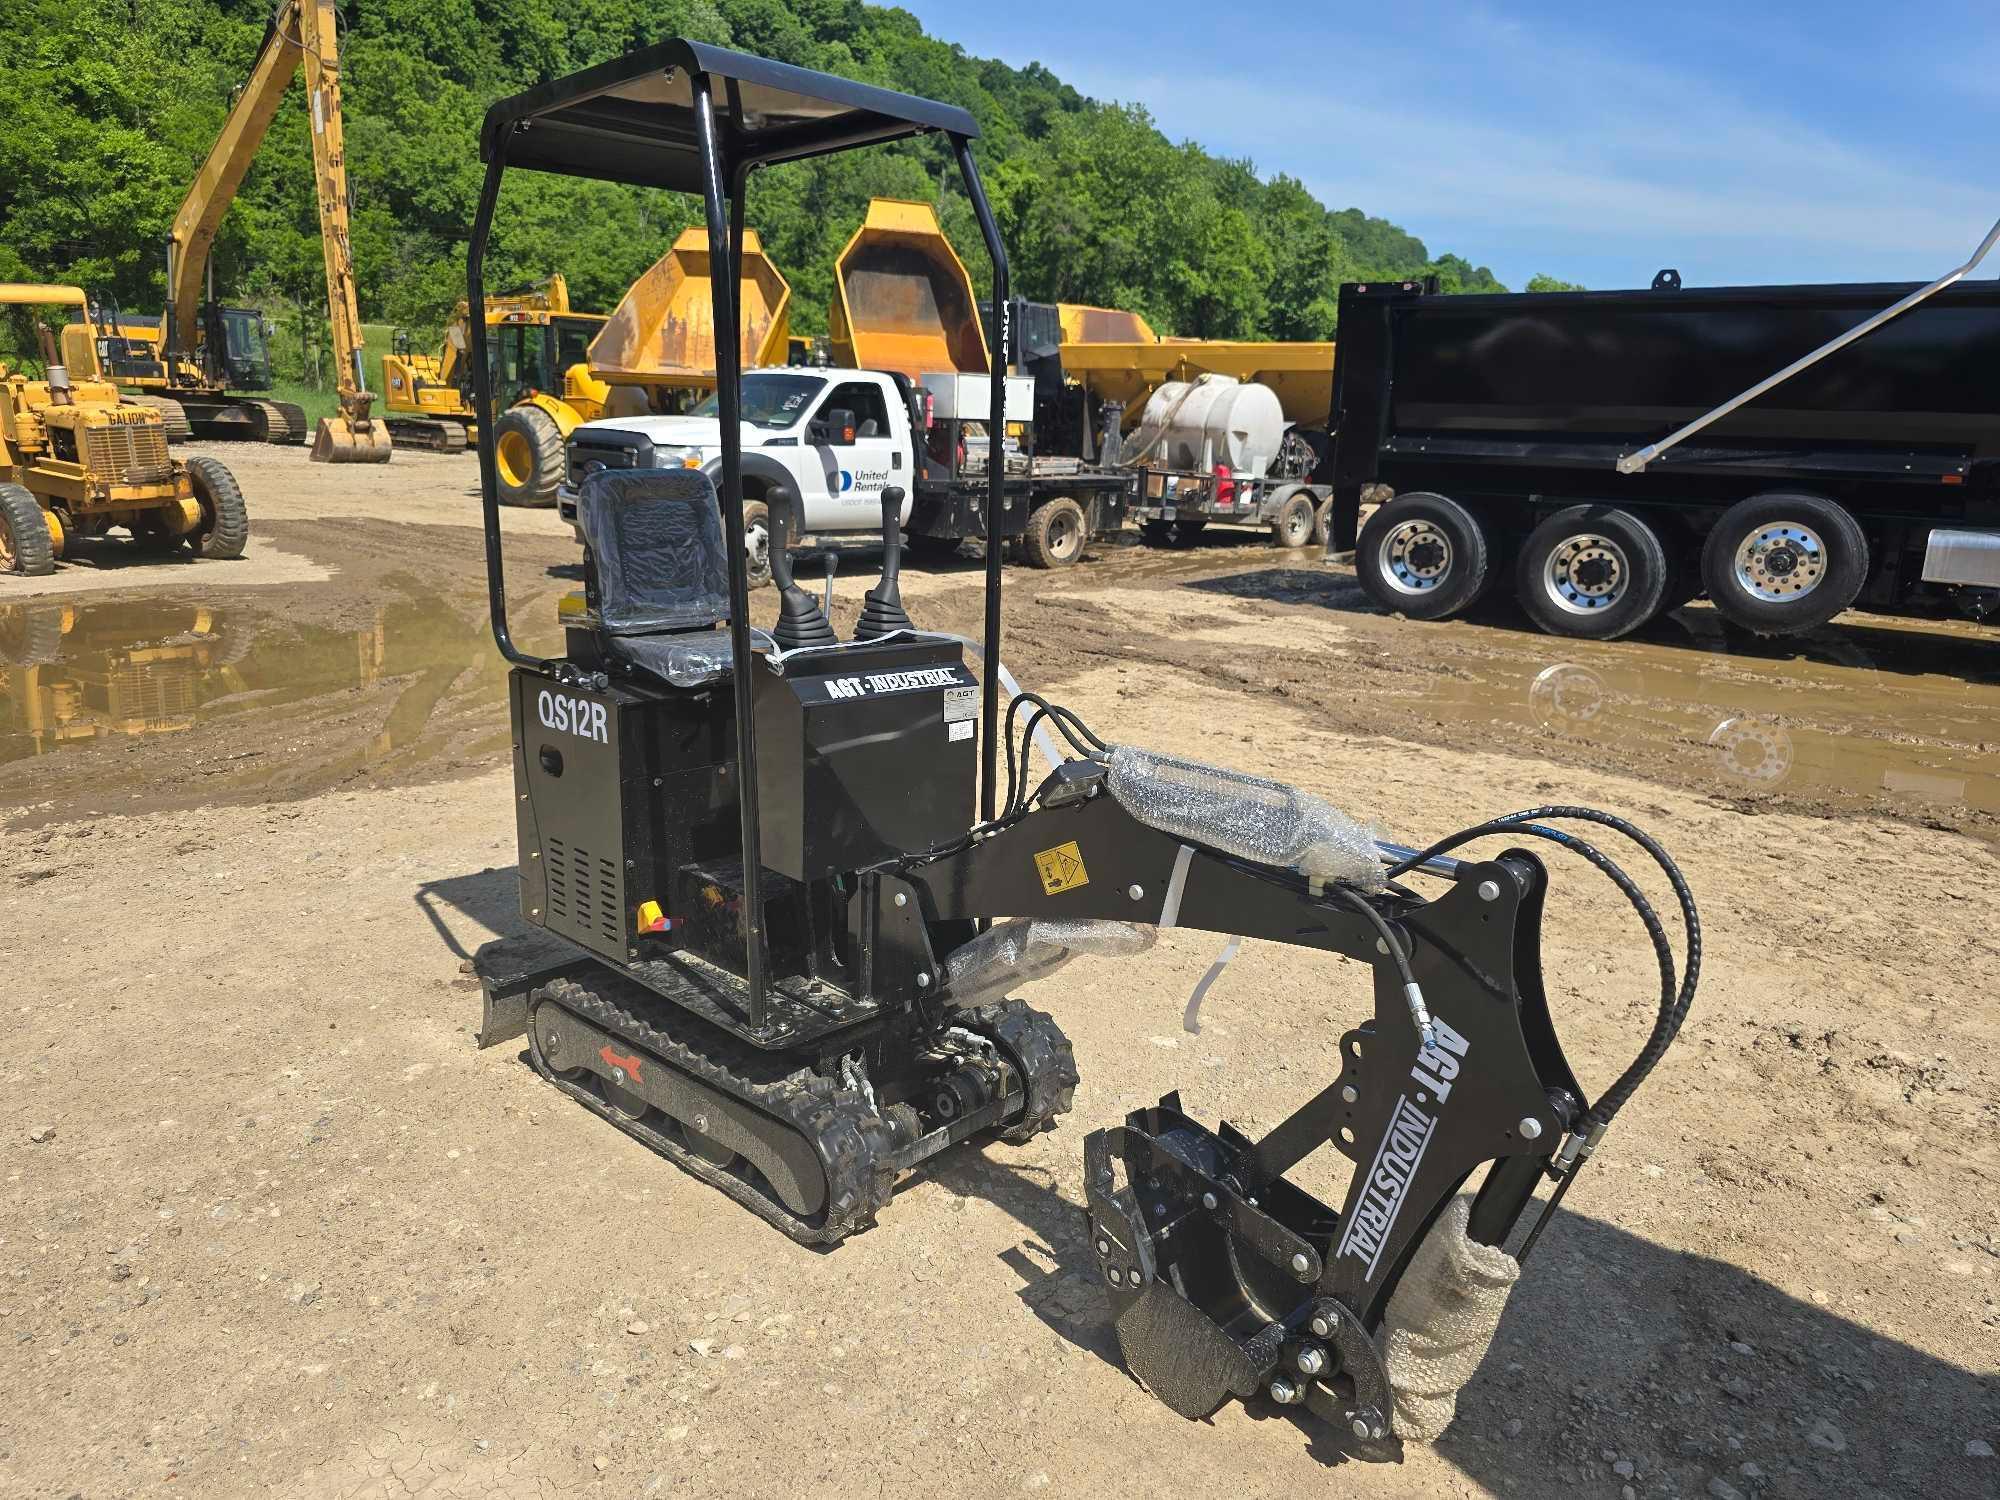 NEW AGT QS12R HYDRAULIC EXCAVATOR SN-017850, powered by Briggs & Stratton gas engine, equipped with